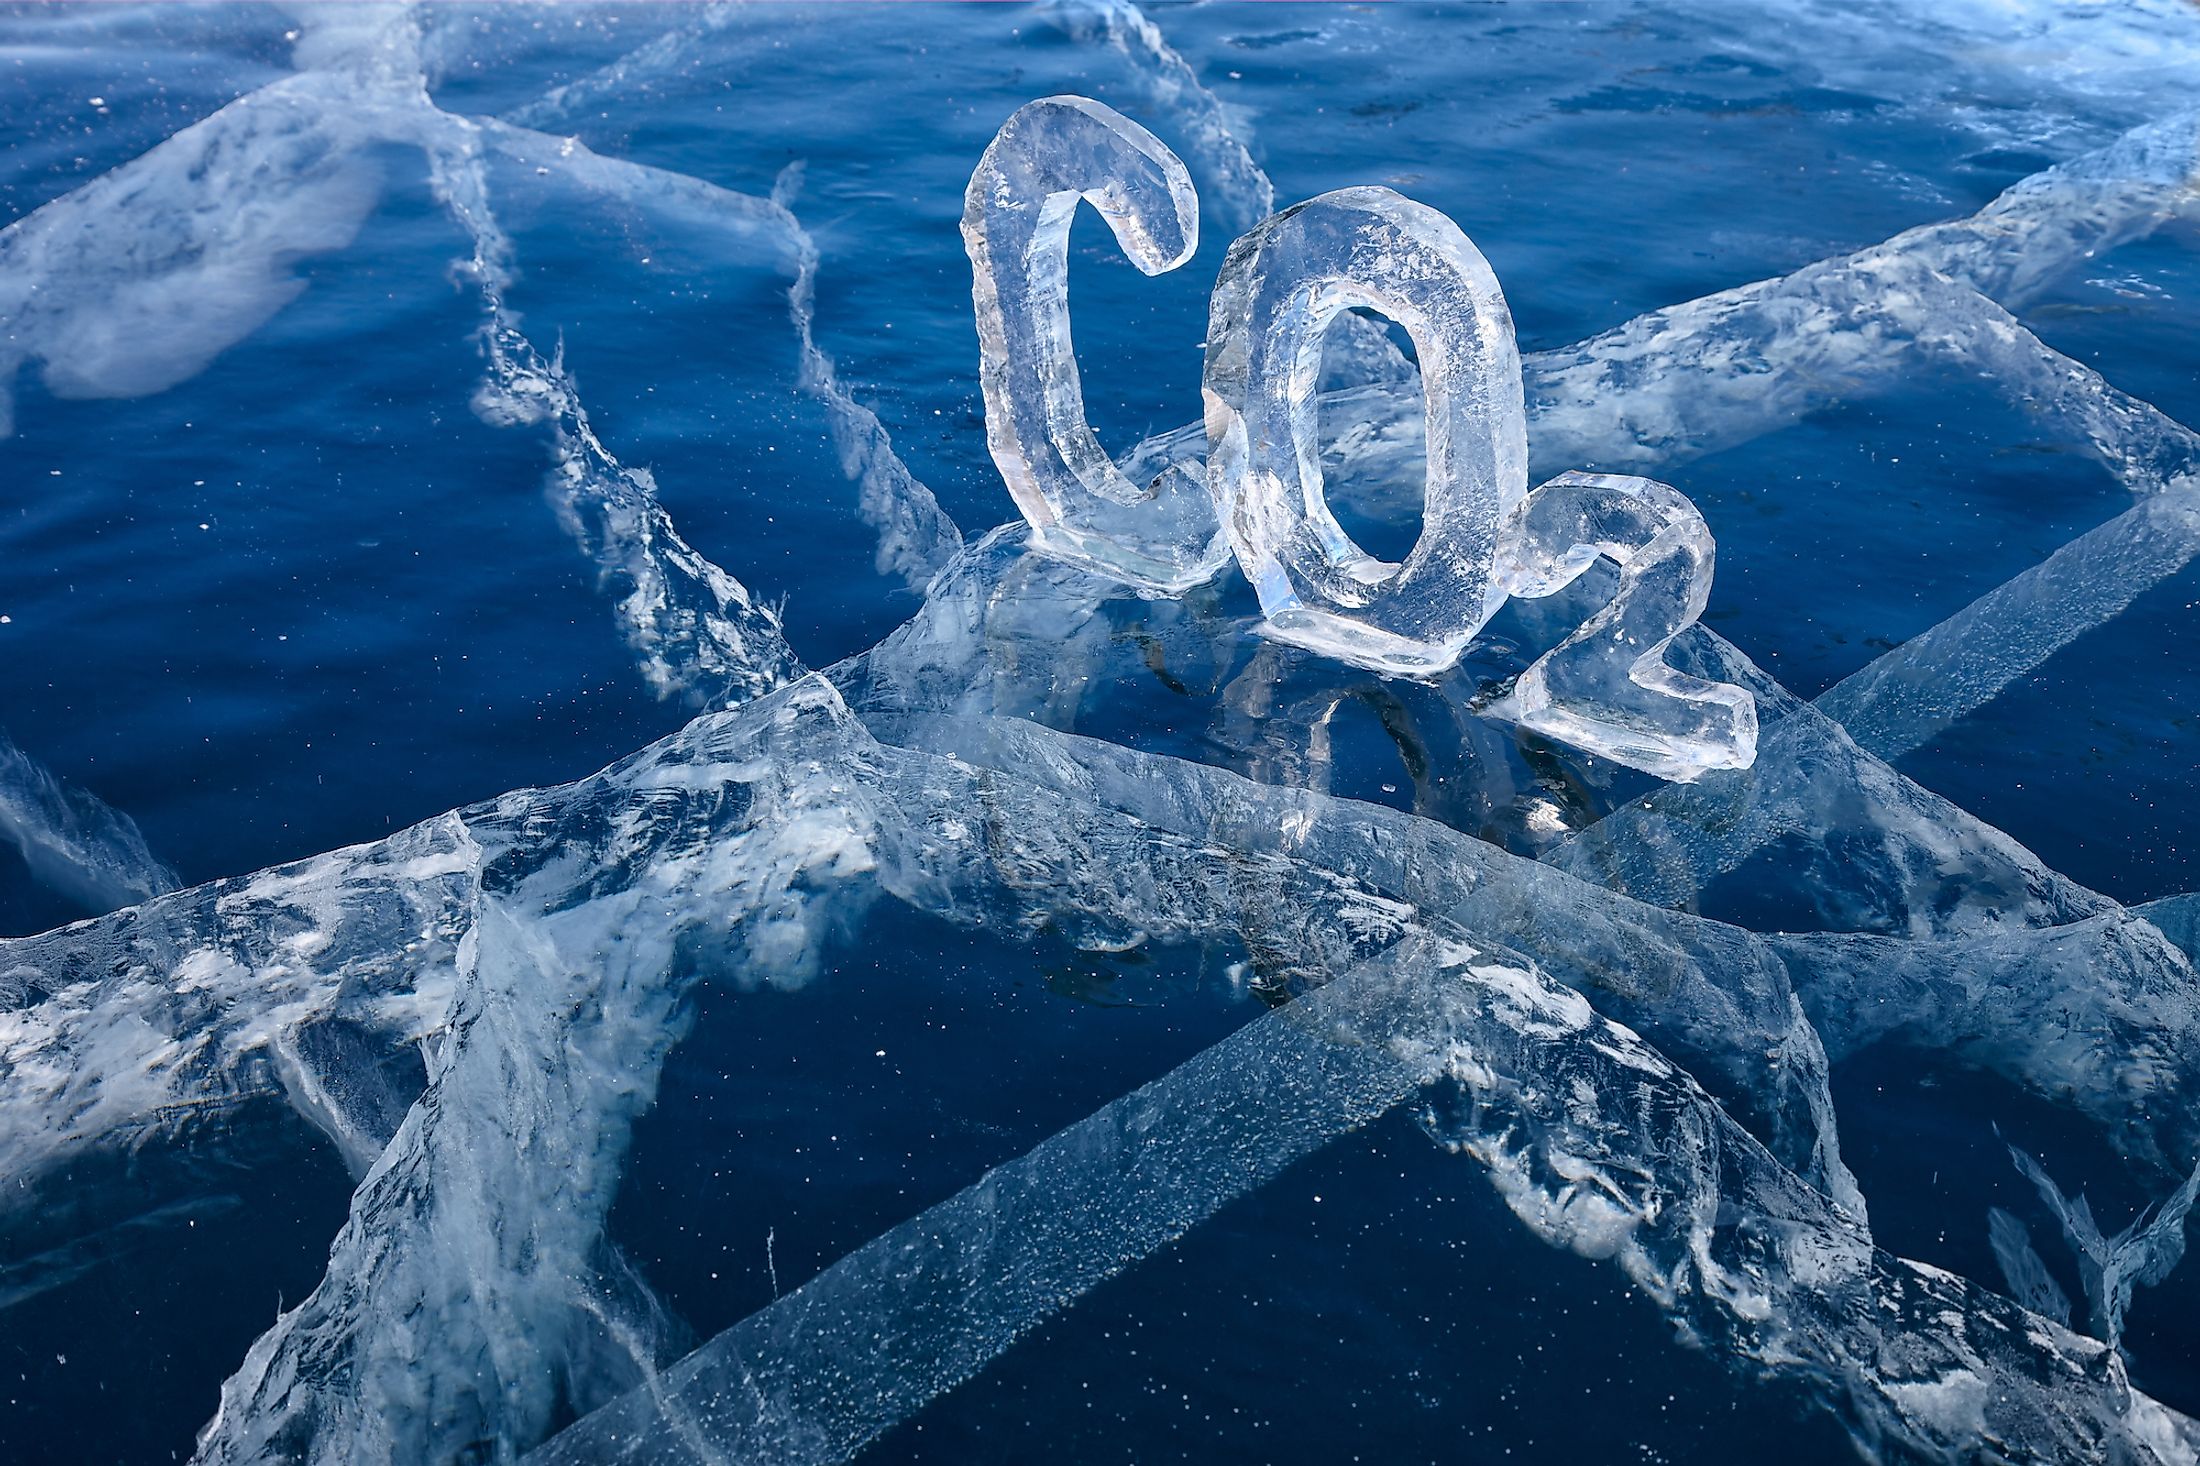 Carbon dioxide is released in large volumes when limnic eruptions occur.